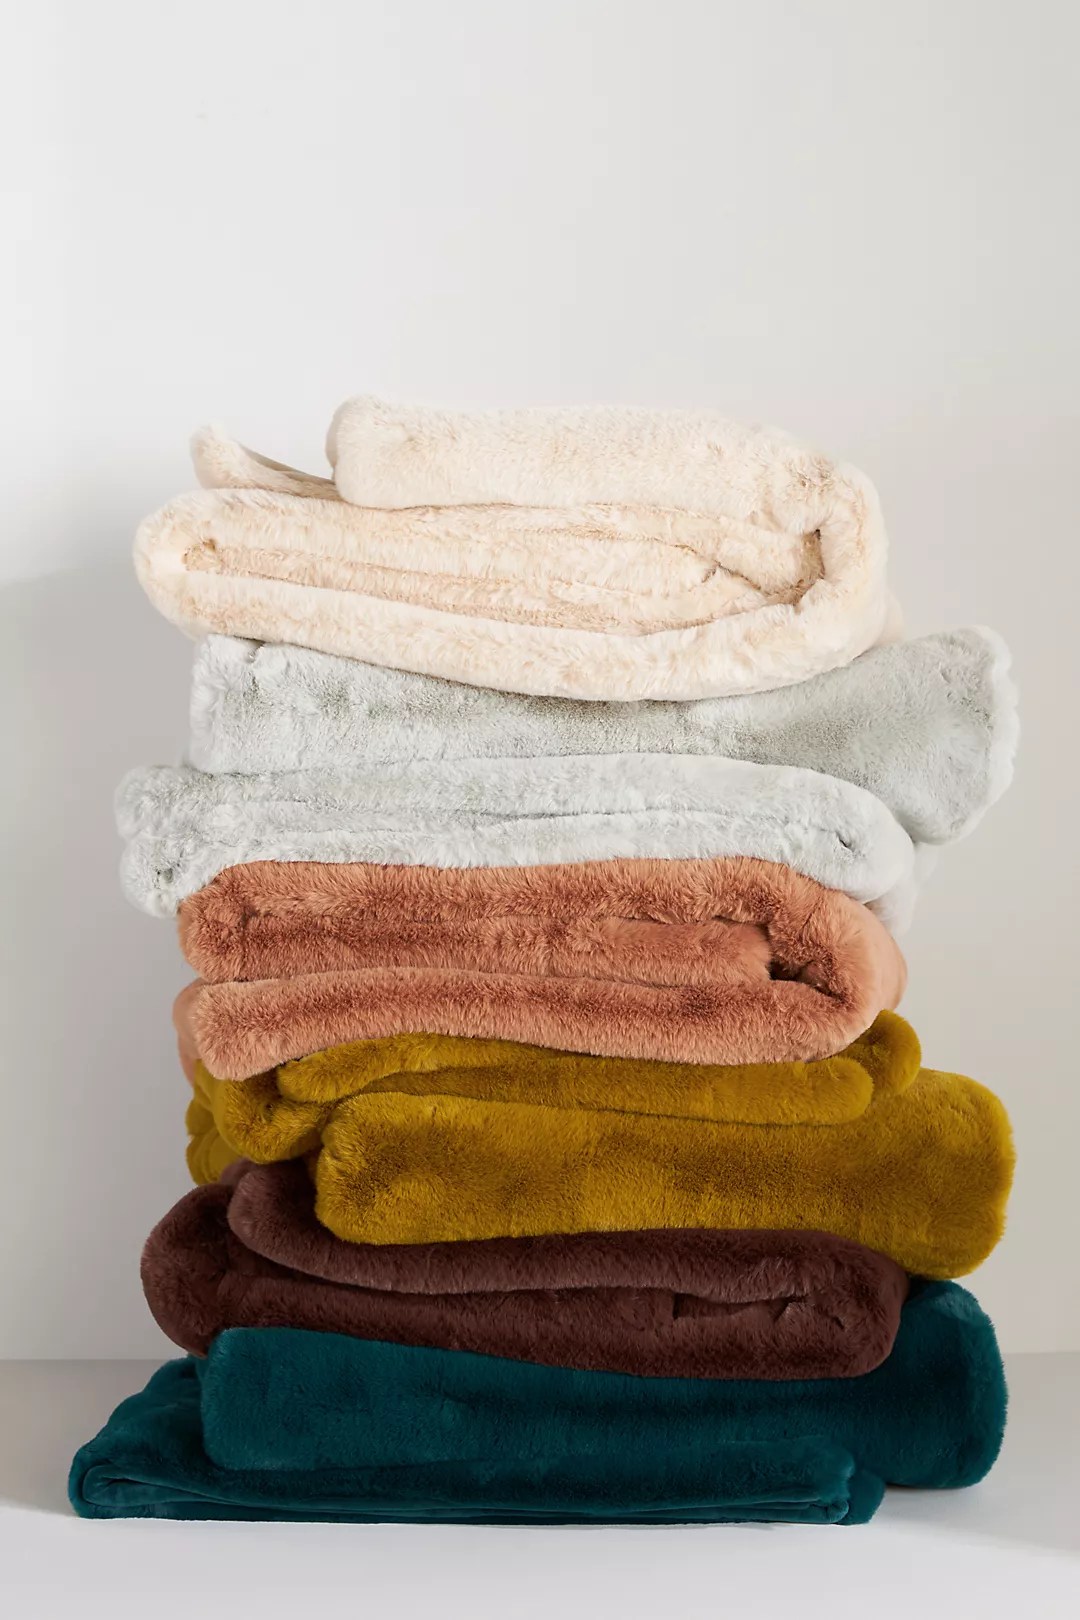 sophie faux fur blankets stacked in different colors on a white background for the anthropologie black friday sale